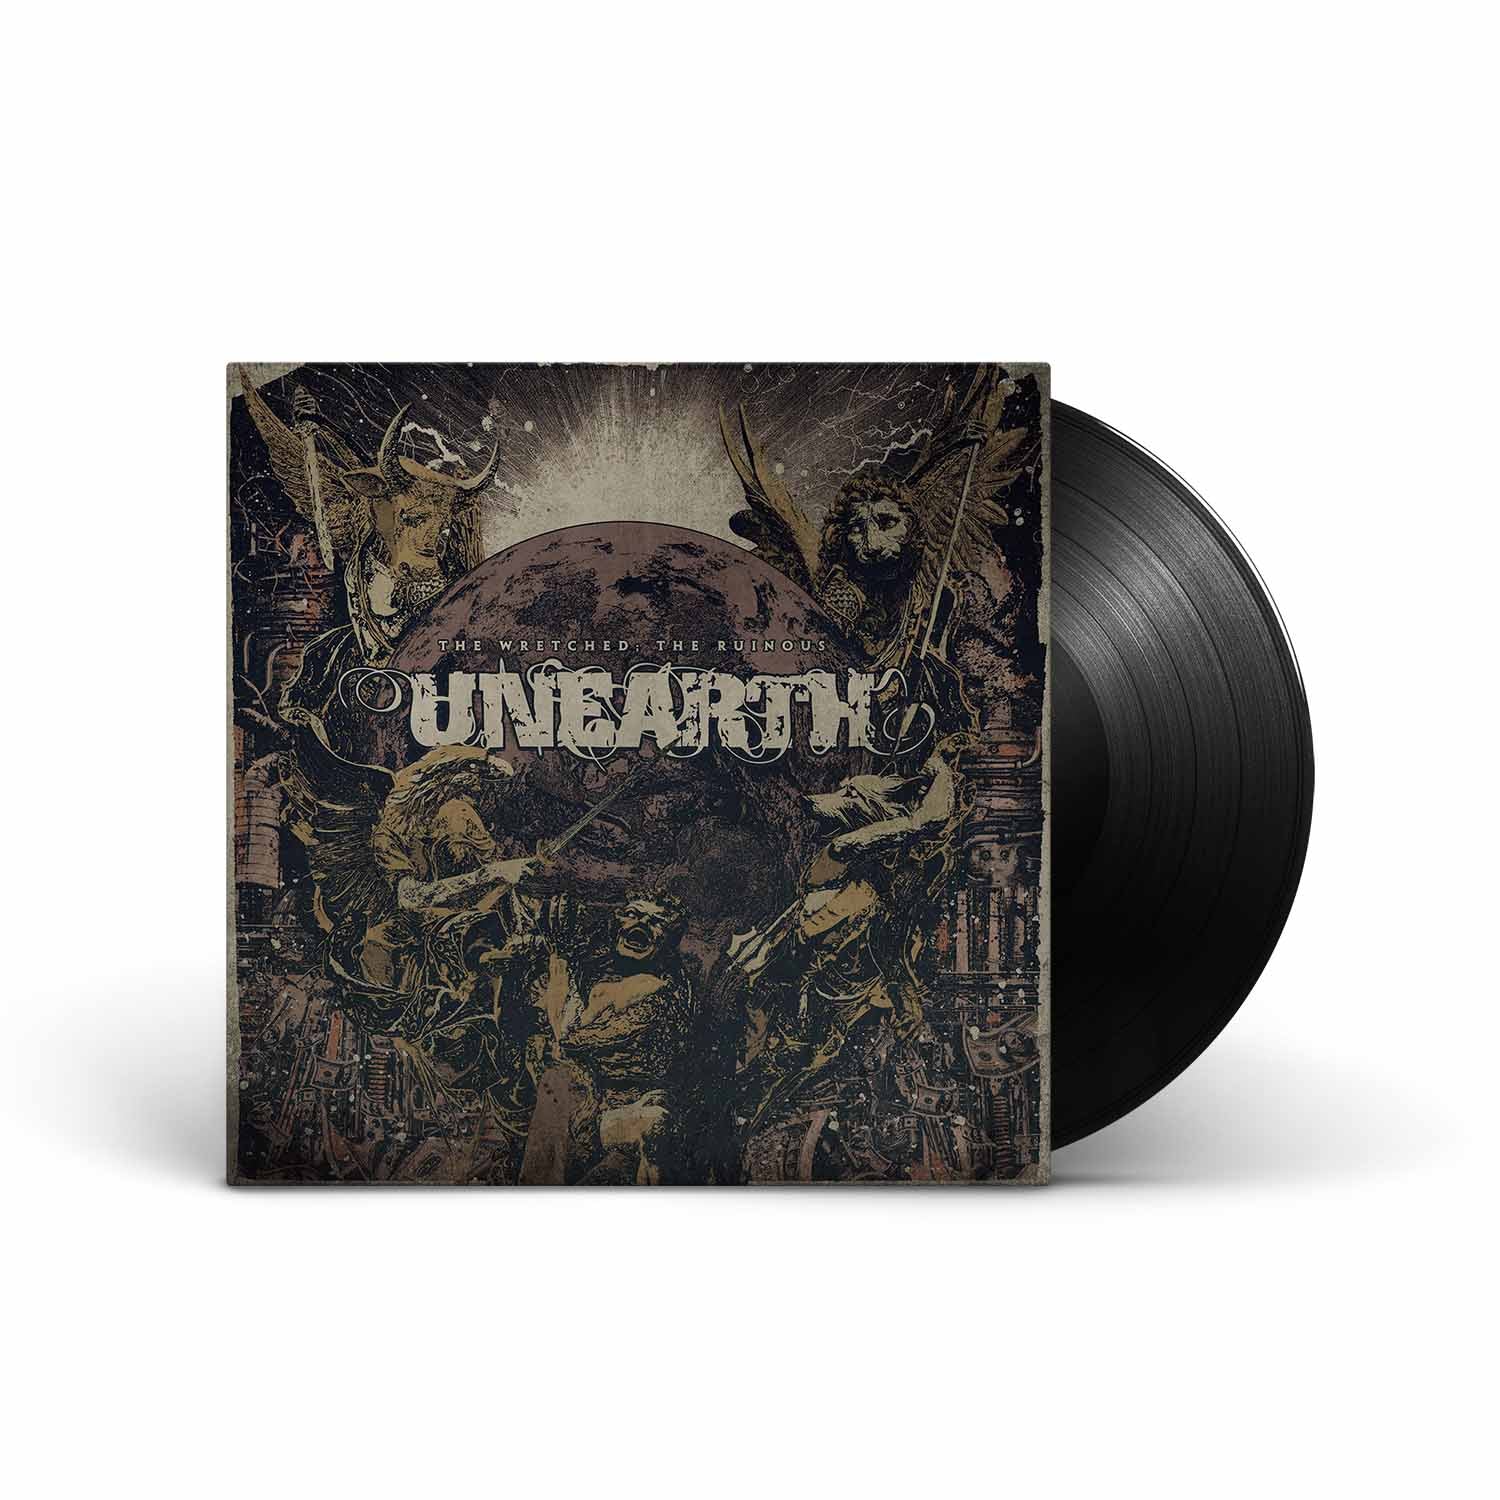 UNEARTH - The Wretched; The Ruinous - Black LP